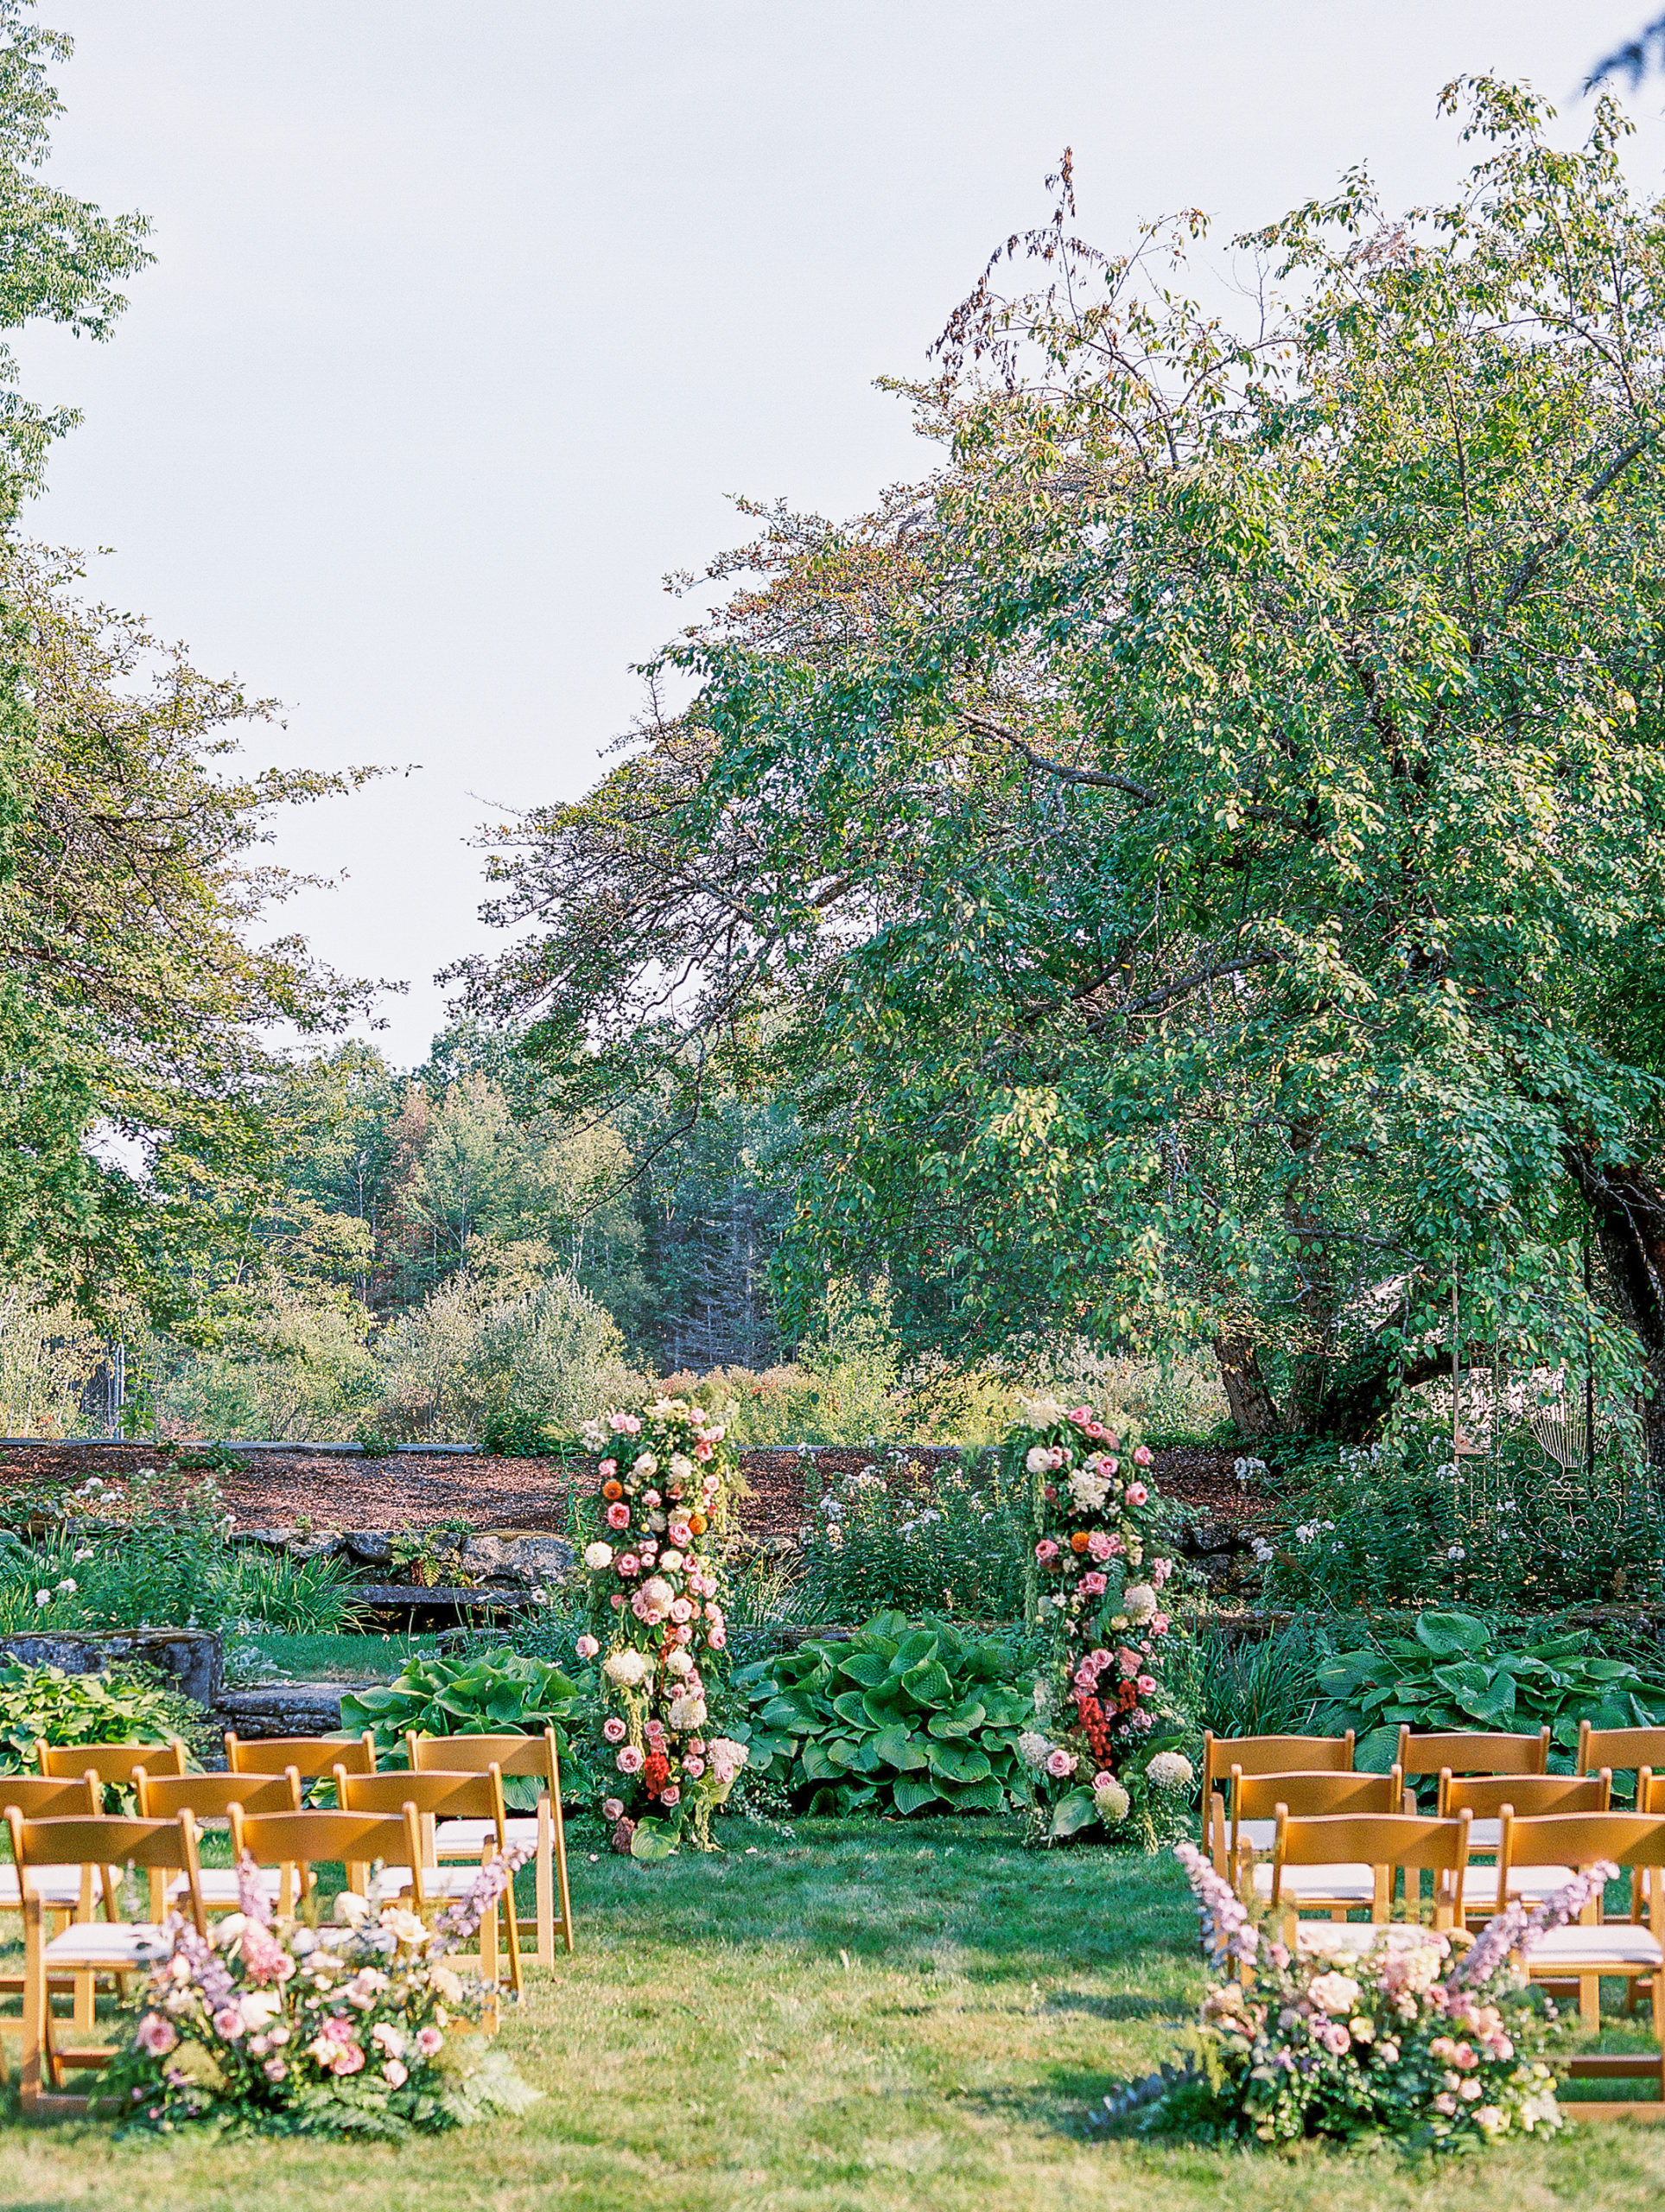 Wedding ceremony aisle with trees and pink and cream flowers for New Hampshire Wedding Photography